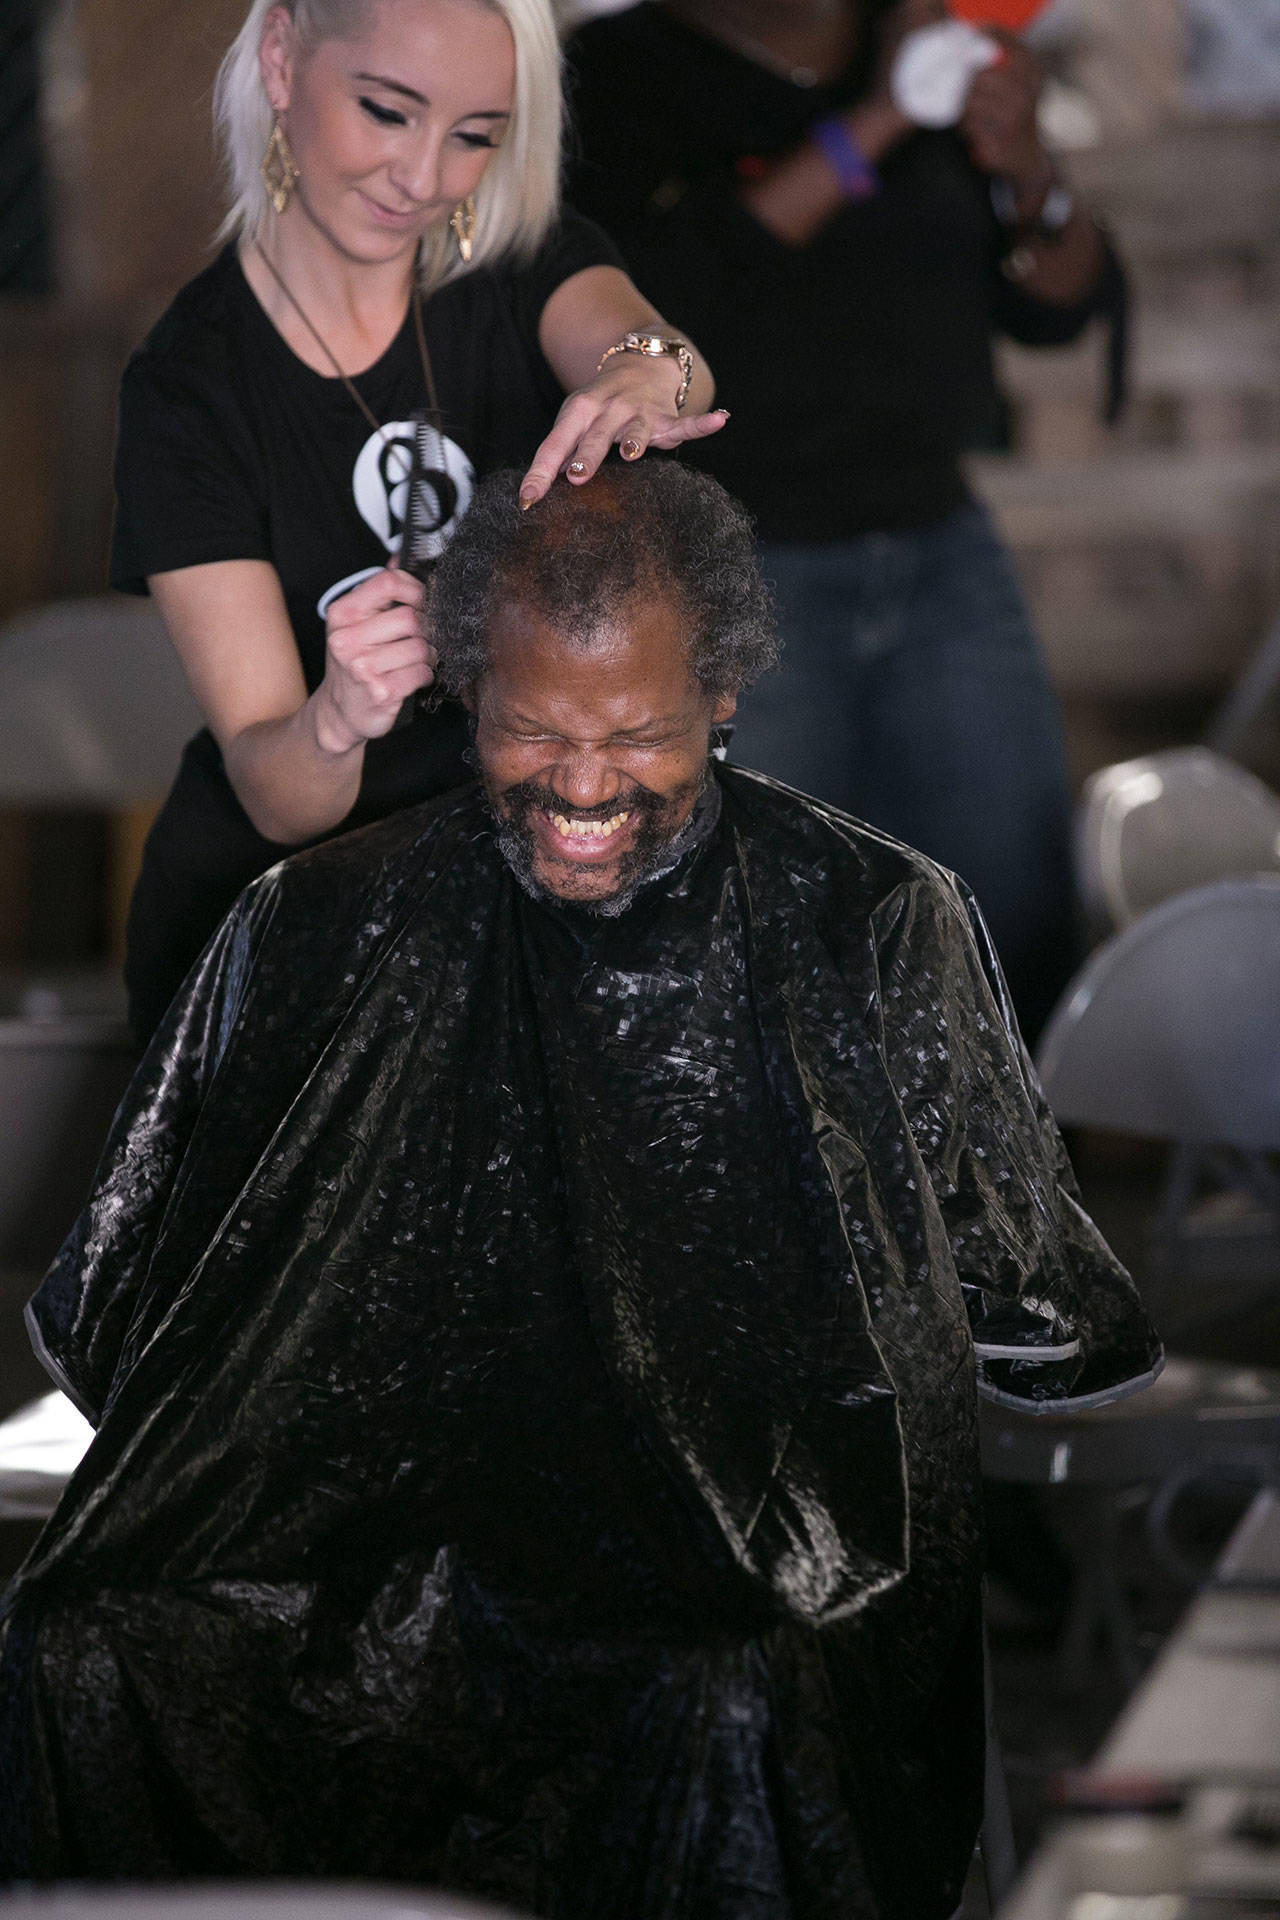 One of the things The Beyond Project does is cut and style hair of marginalized populations such as the homeless. Courtesy of The Beyond Project